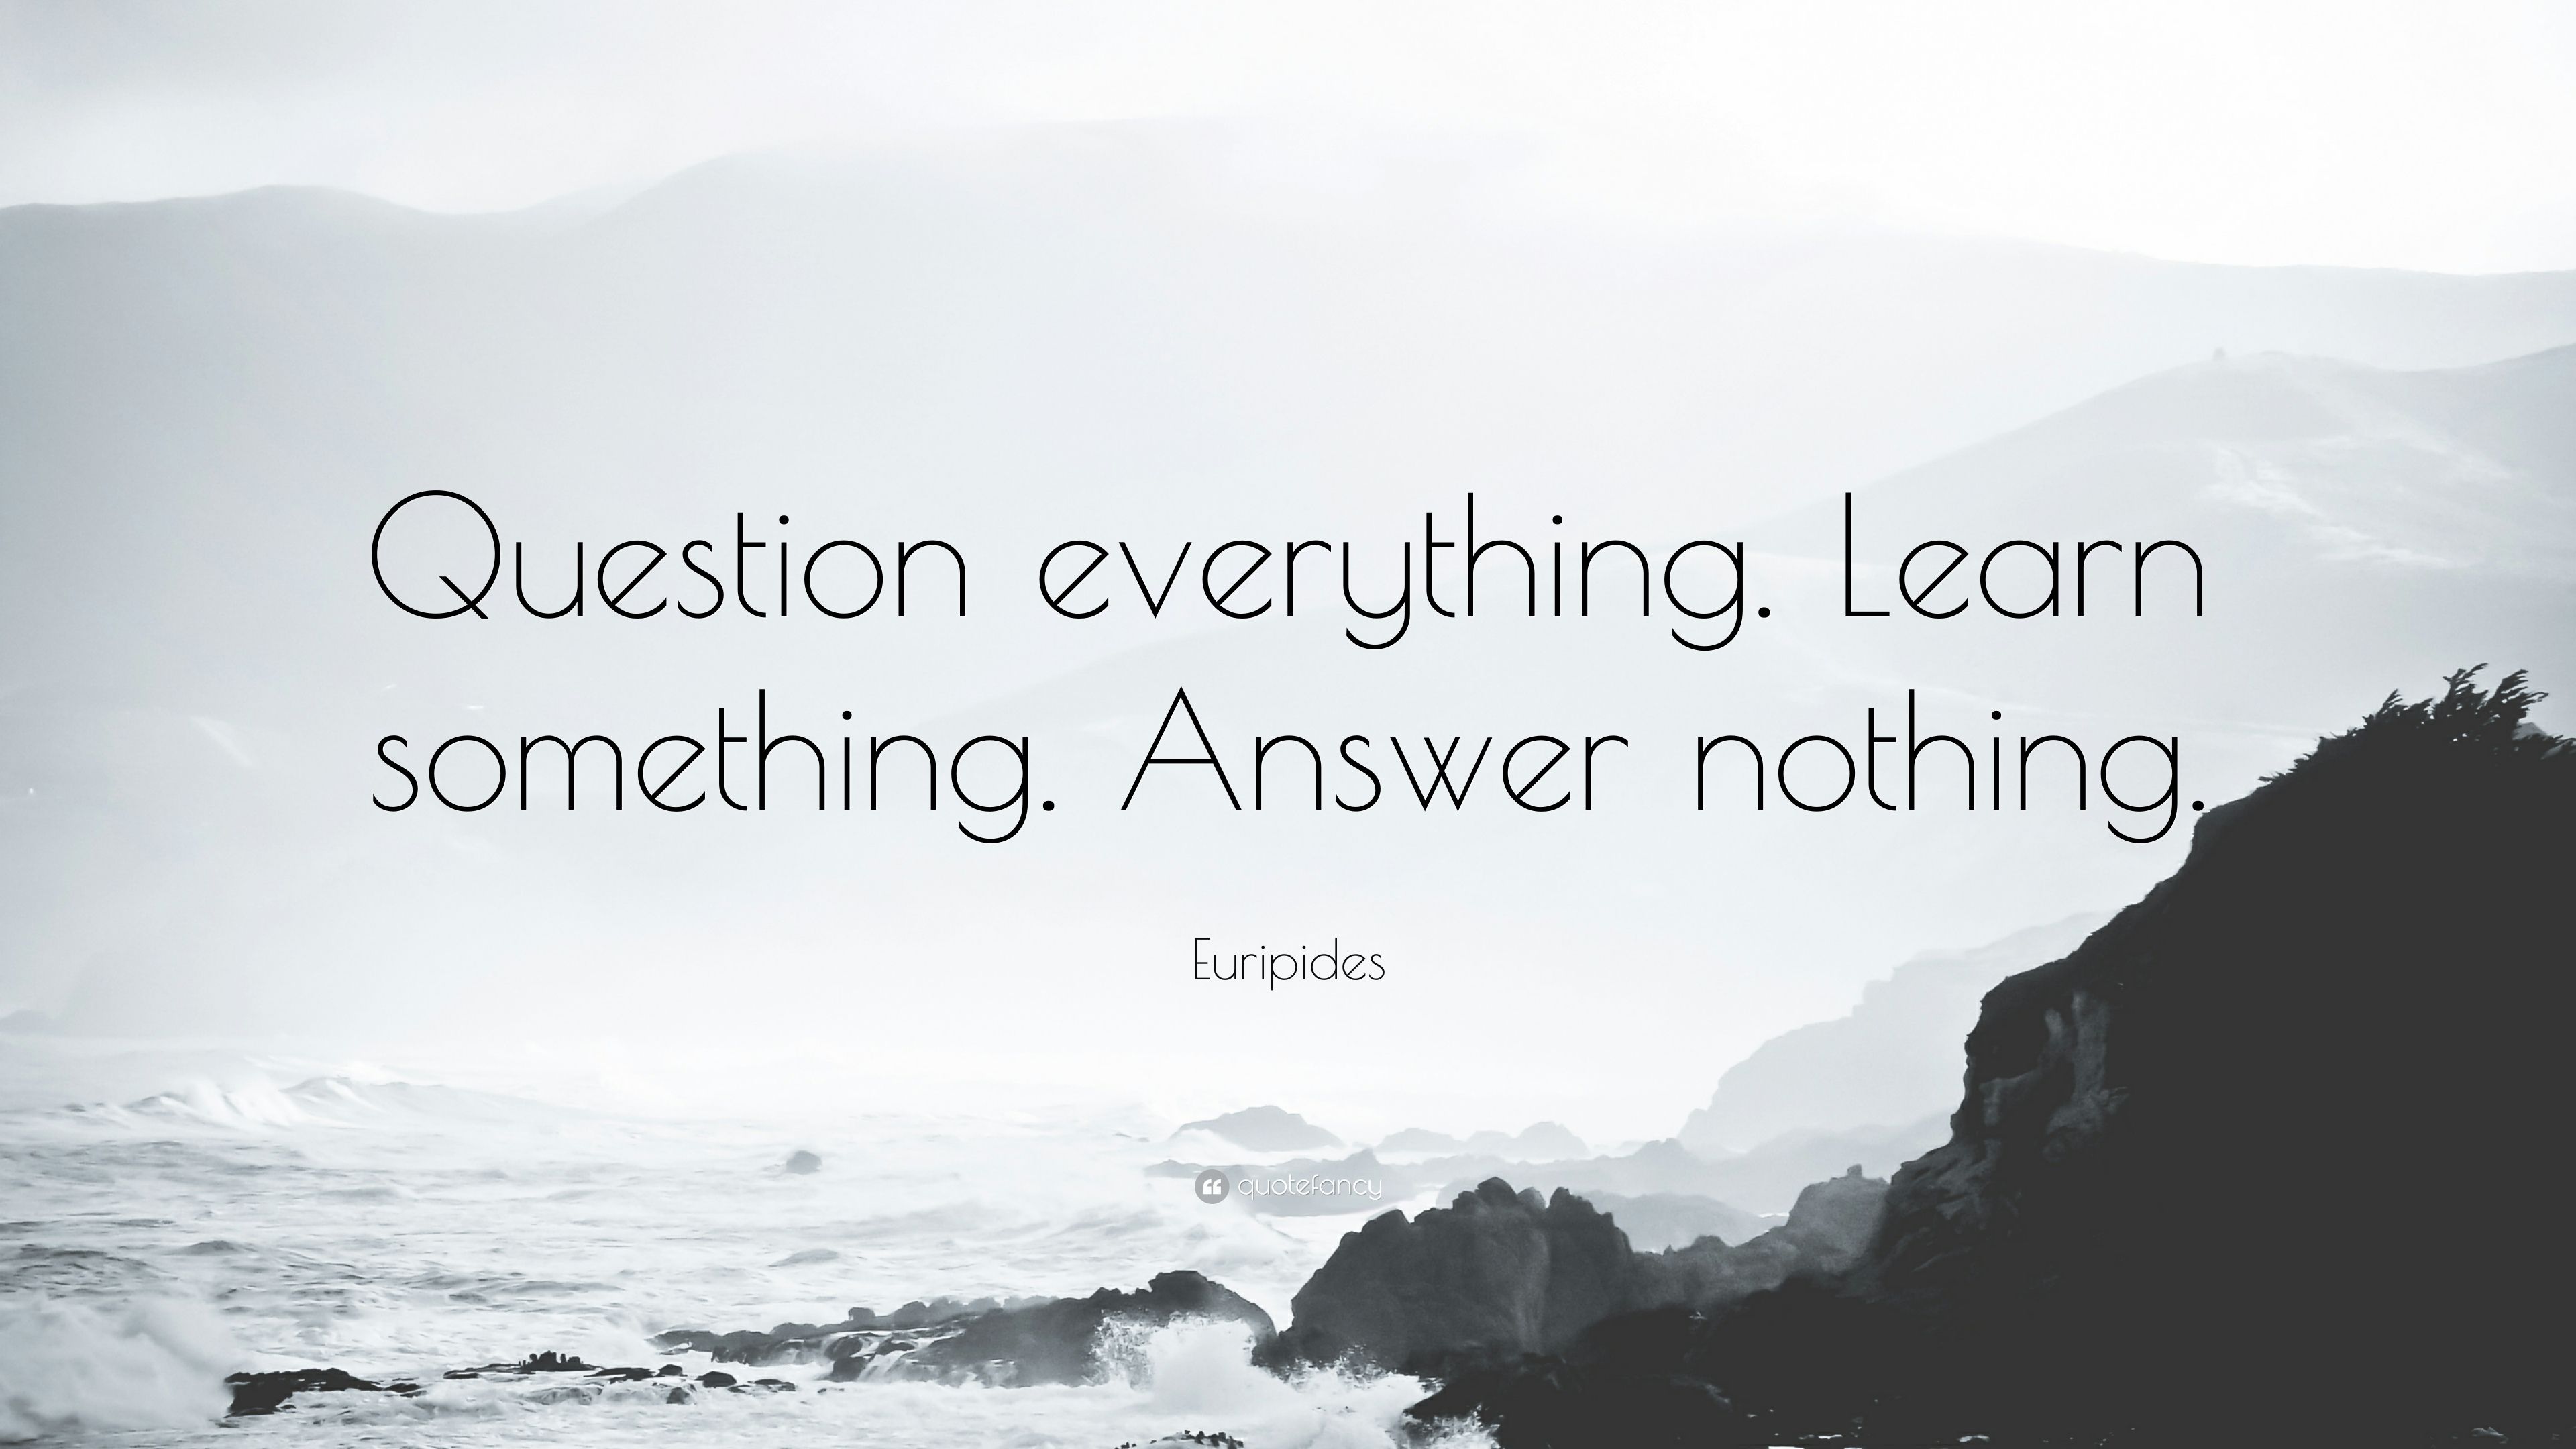 Euripides Quote: “Question everything. Learn something. Answer nothing.” (12 wallpaper)